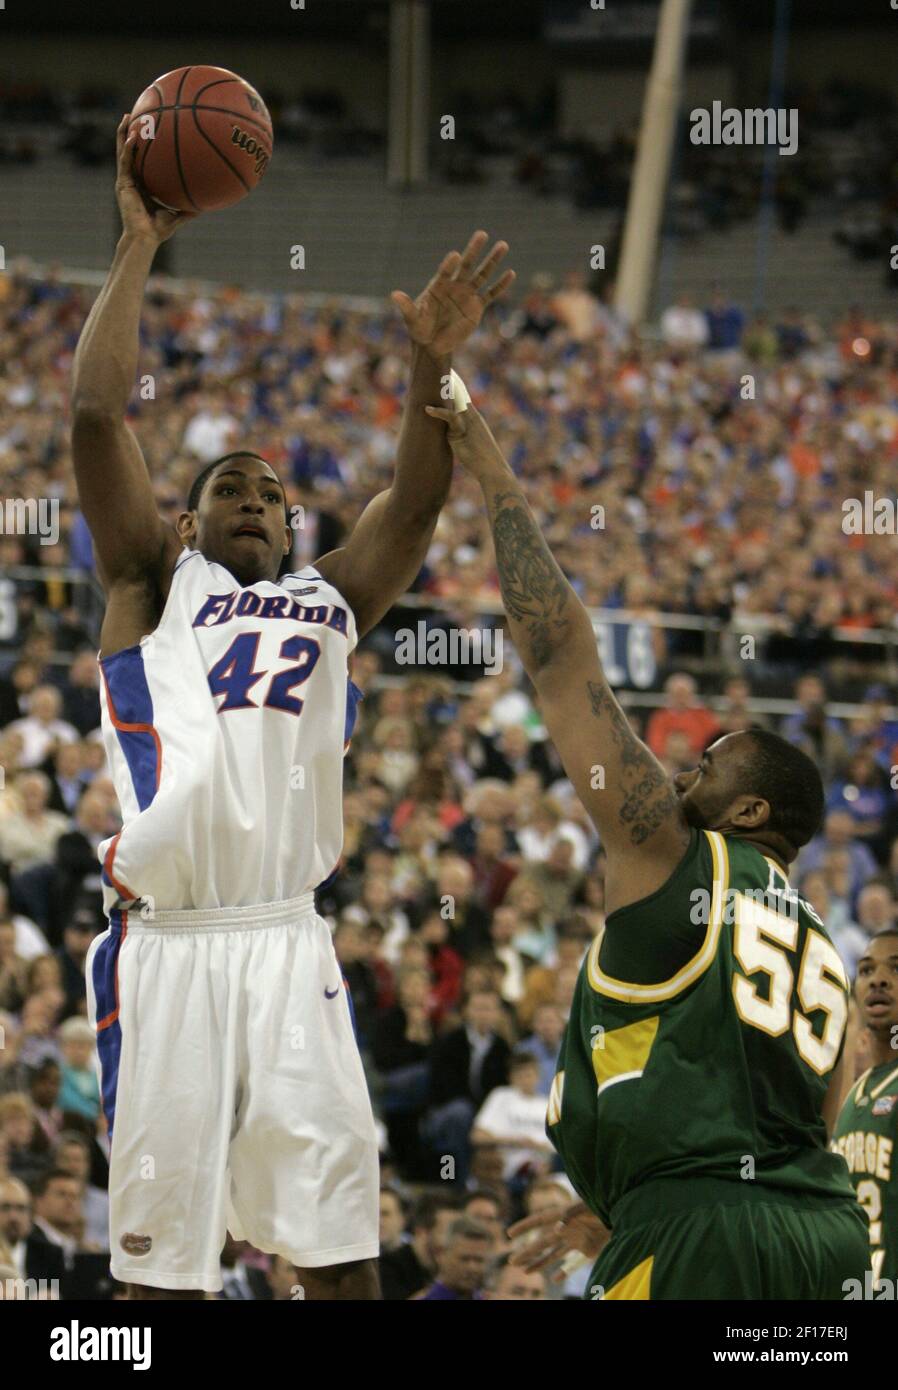 Florida's Al Horford shoots over George Mason's Jai Lewis in the first half of the first game in the Final Four Saturday, April 1, 2006 at the RCA Dome in Indianapolis, Indiana. (Photo by Mark Cornelison/Lexington Herald-Leader/KRT) Stock Photo